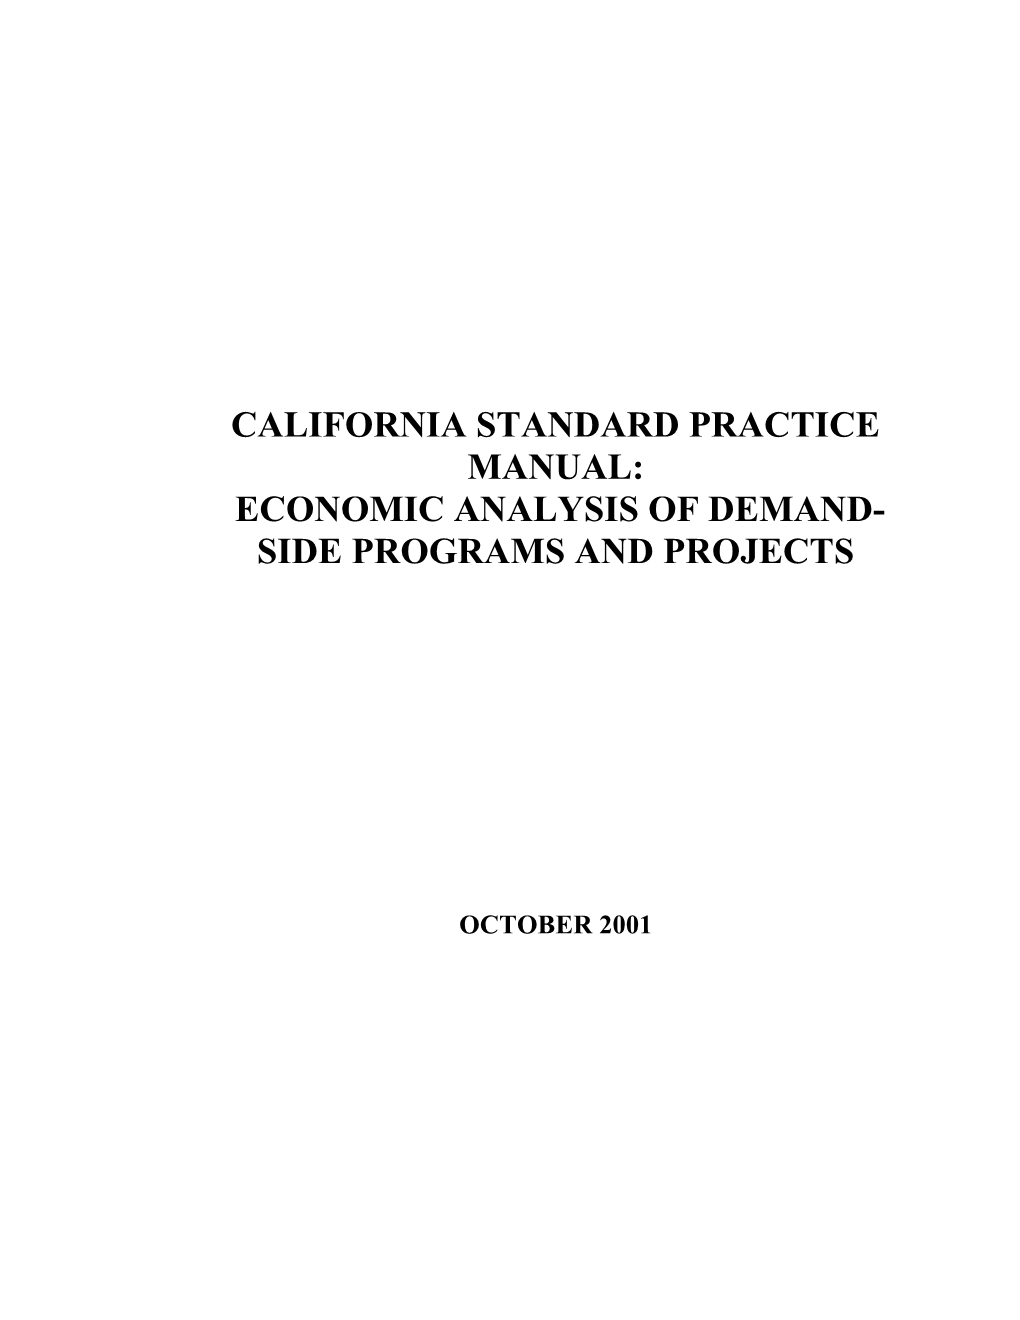 Standard Practices Manual